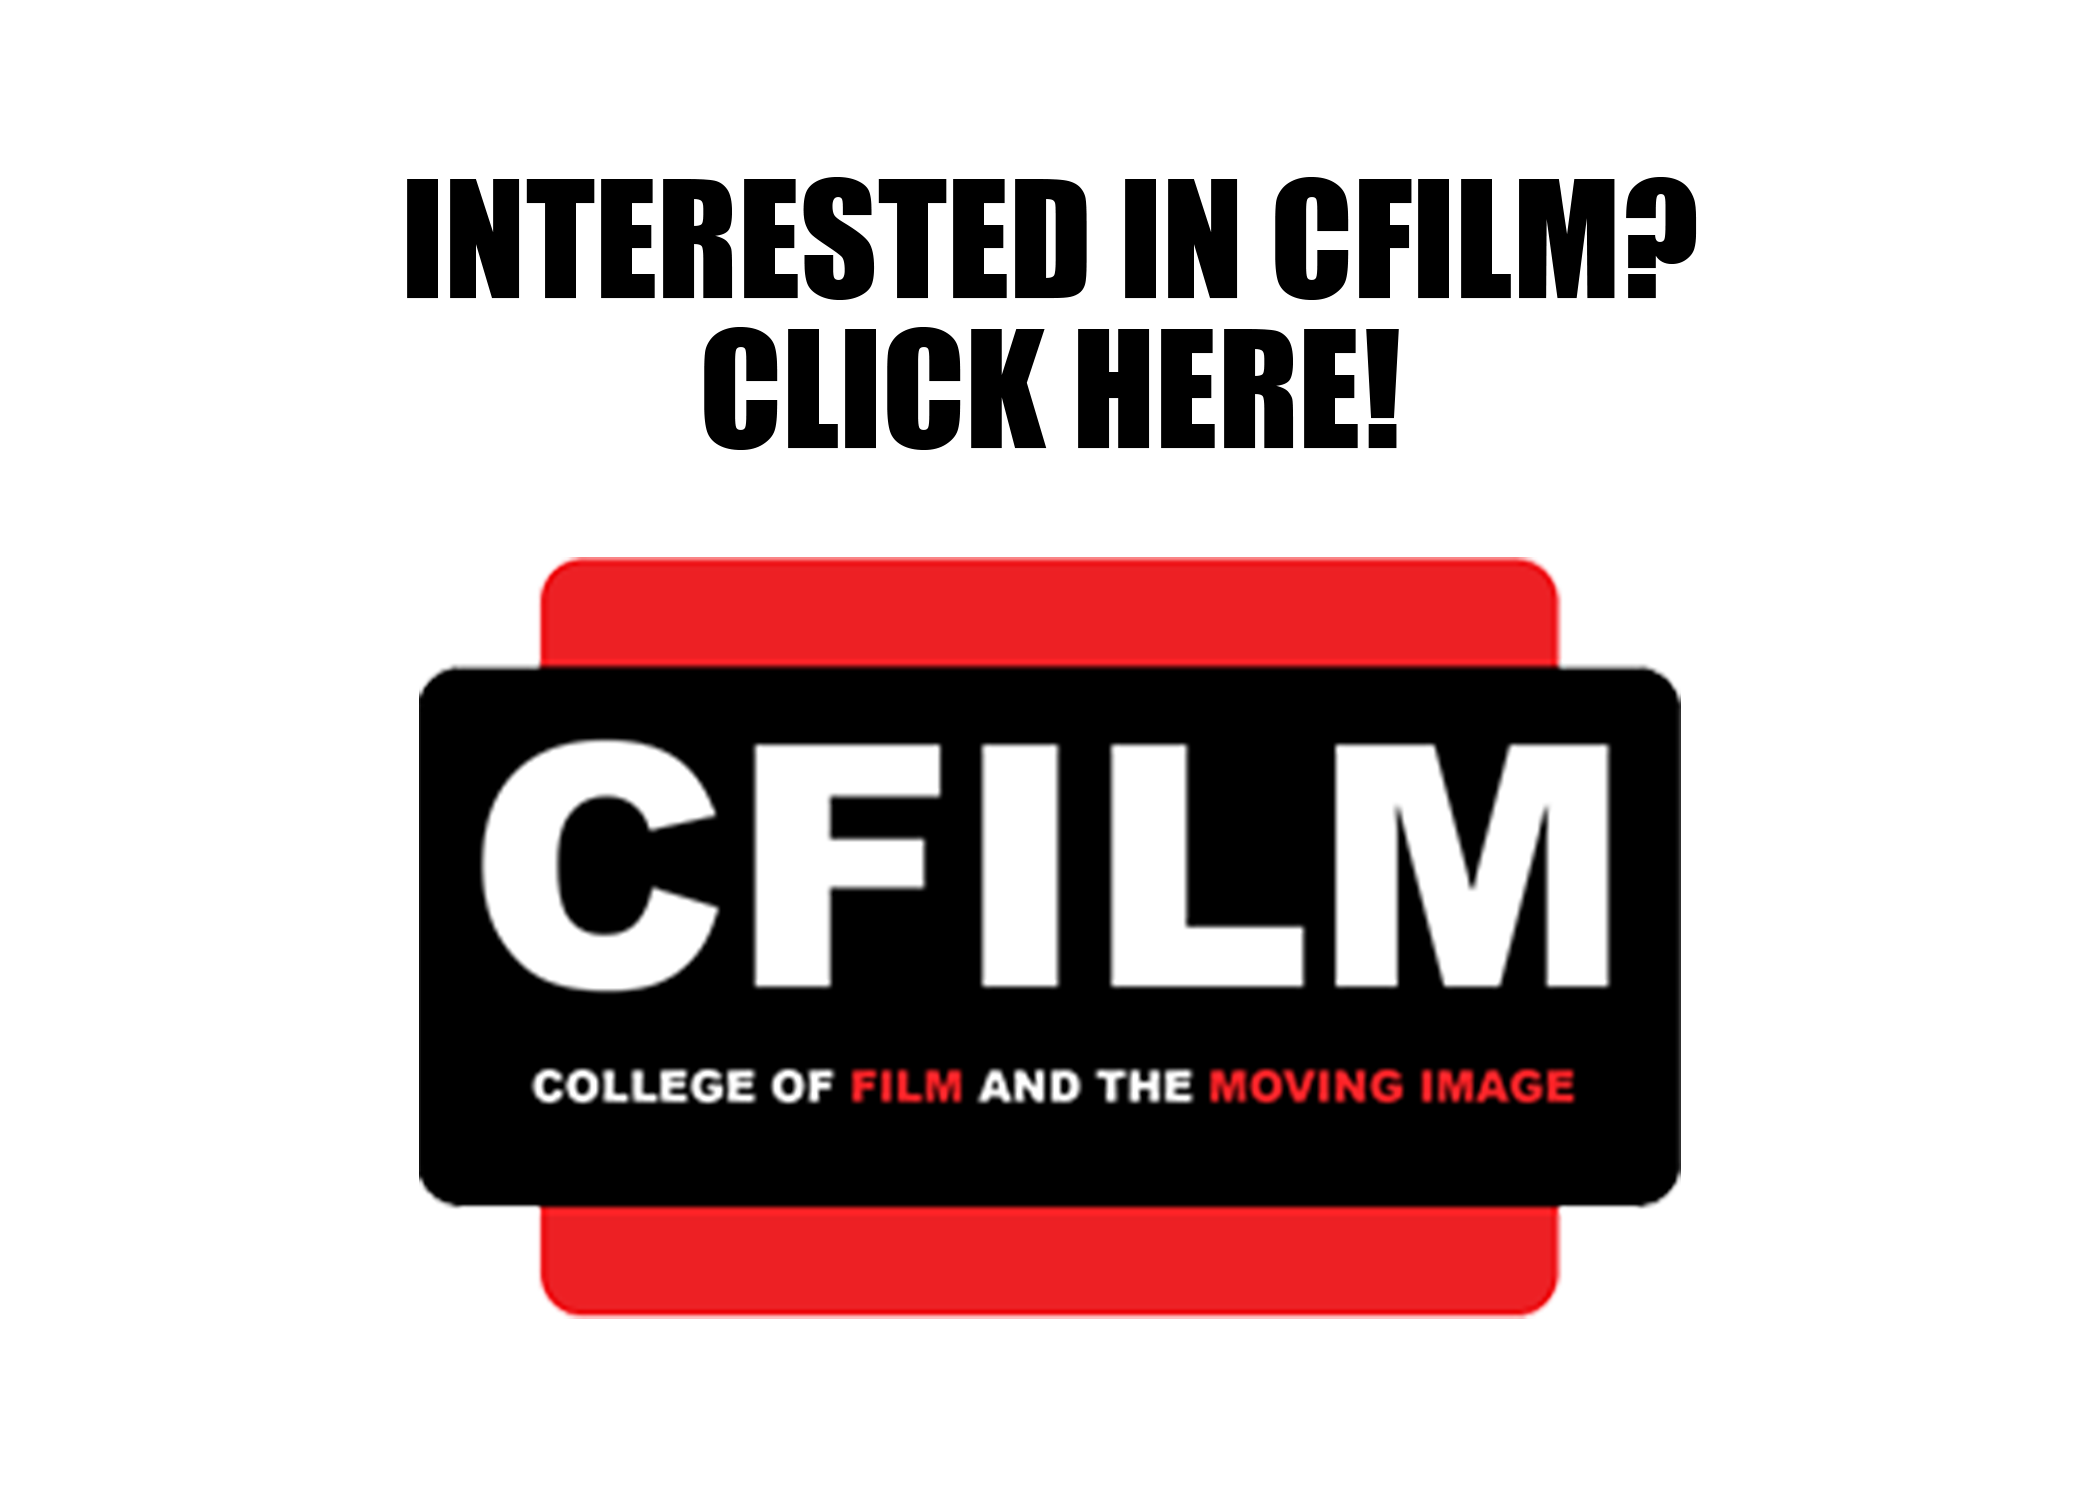 Interested in CFILM? Click Here